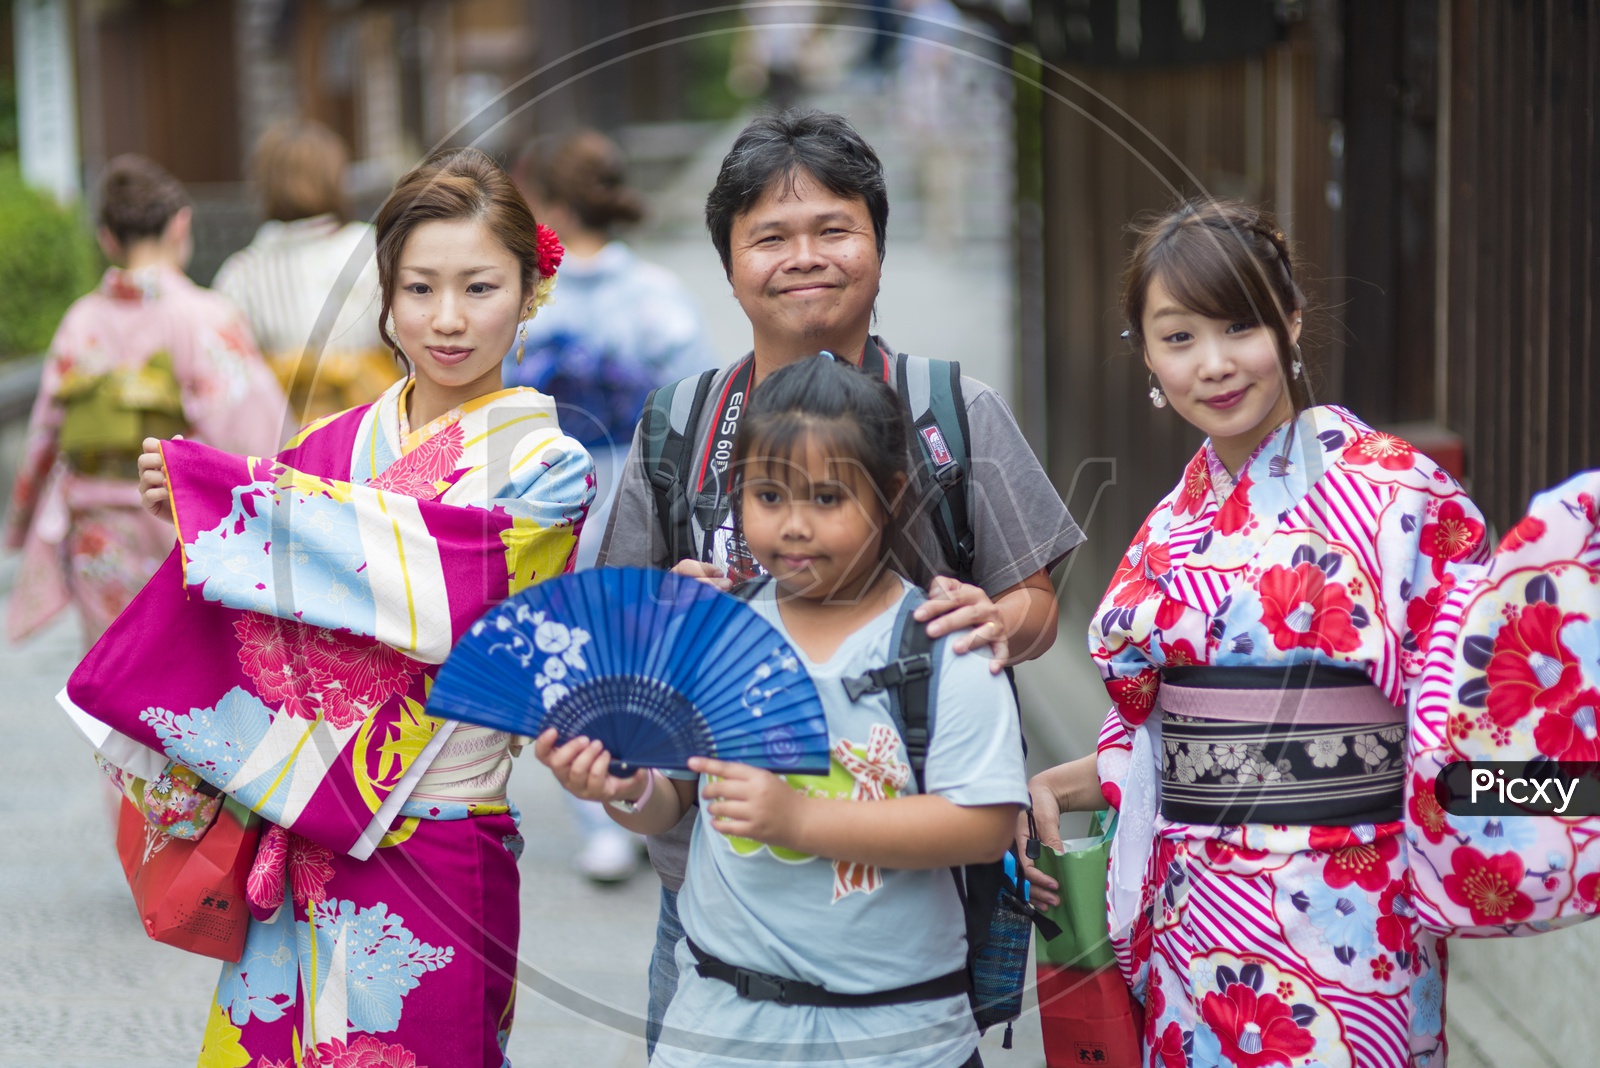 A Japanese Photographer posing with local people